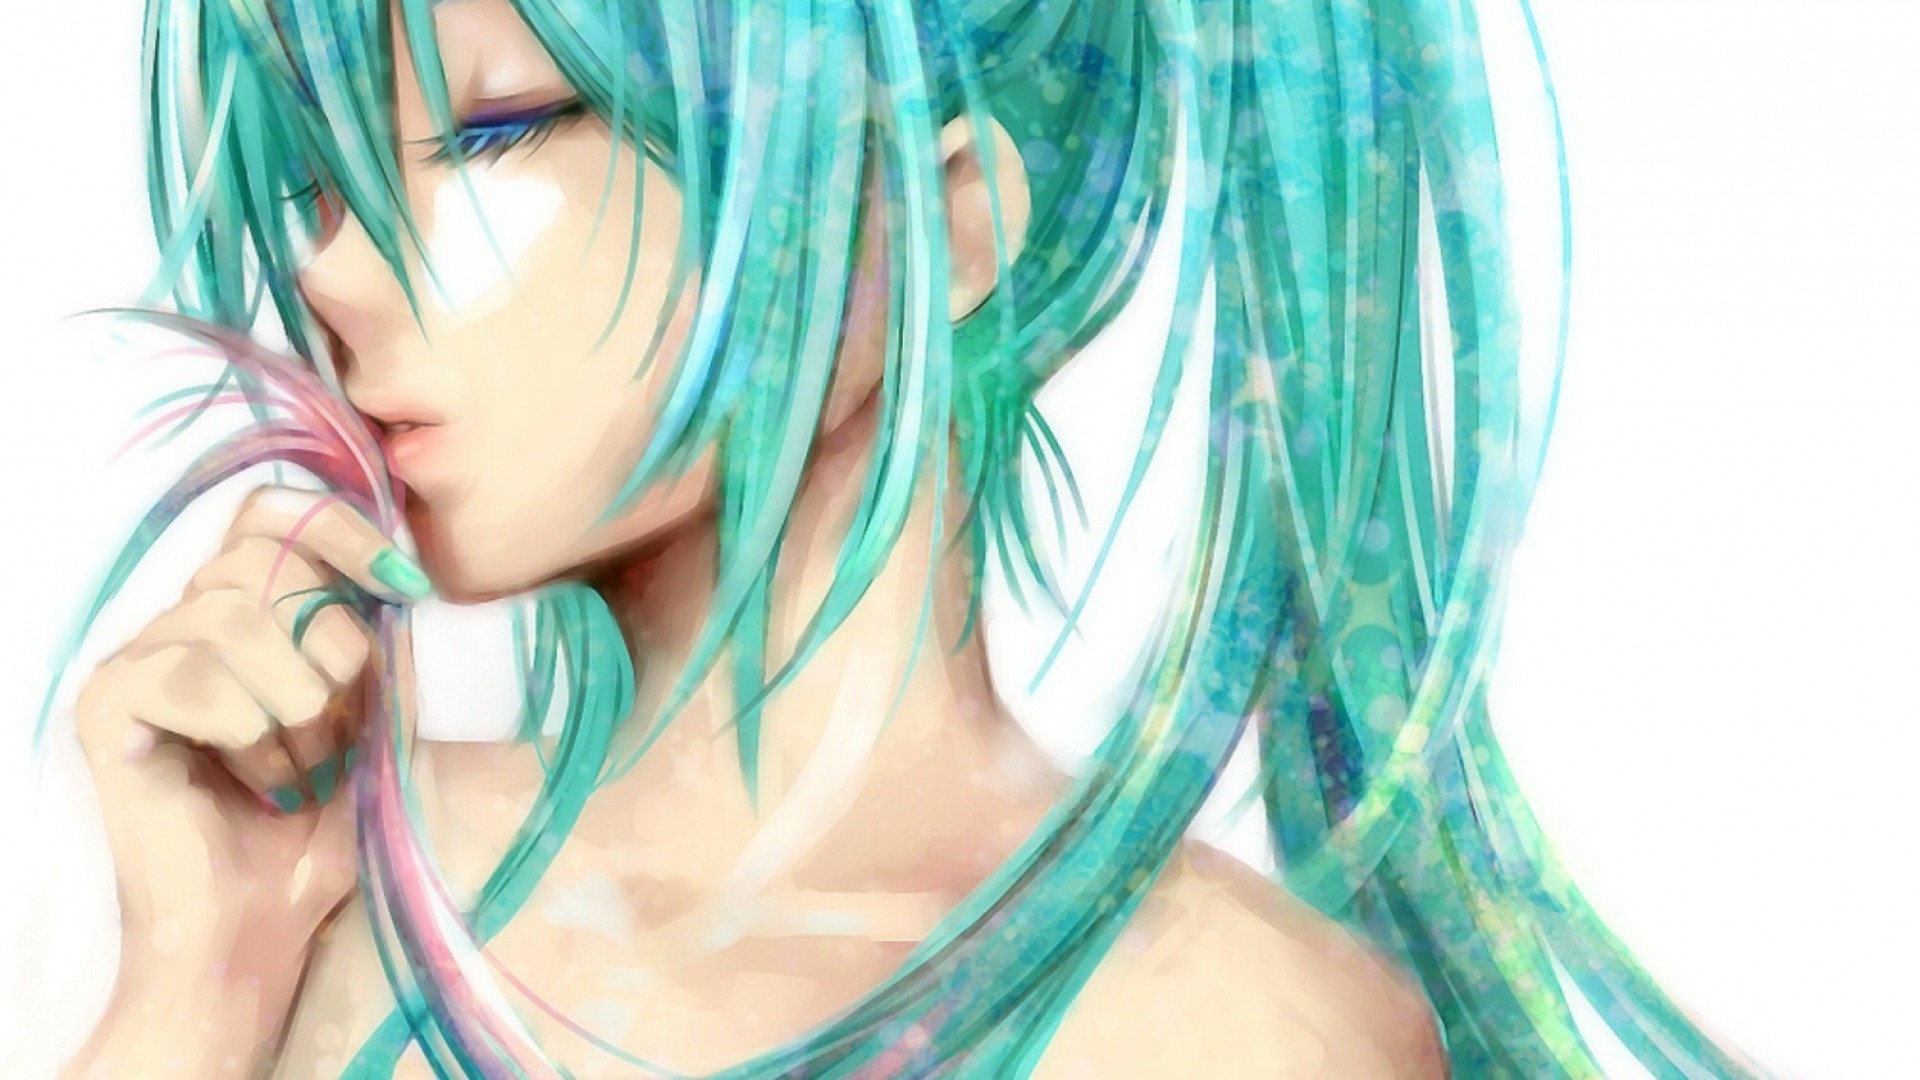 Anime 1920x1080 anime girls anime Hatsune Miku Vocaloid closed eyes cyan hair turquoise face long hair simple background white background painted nails cyan